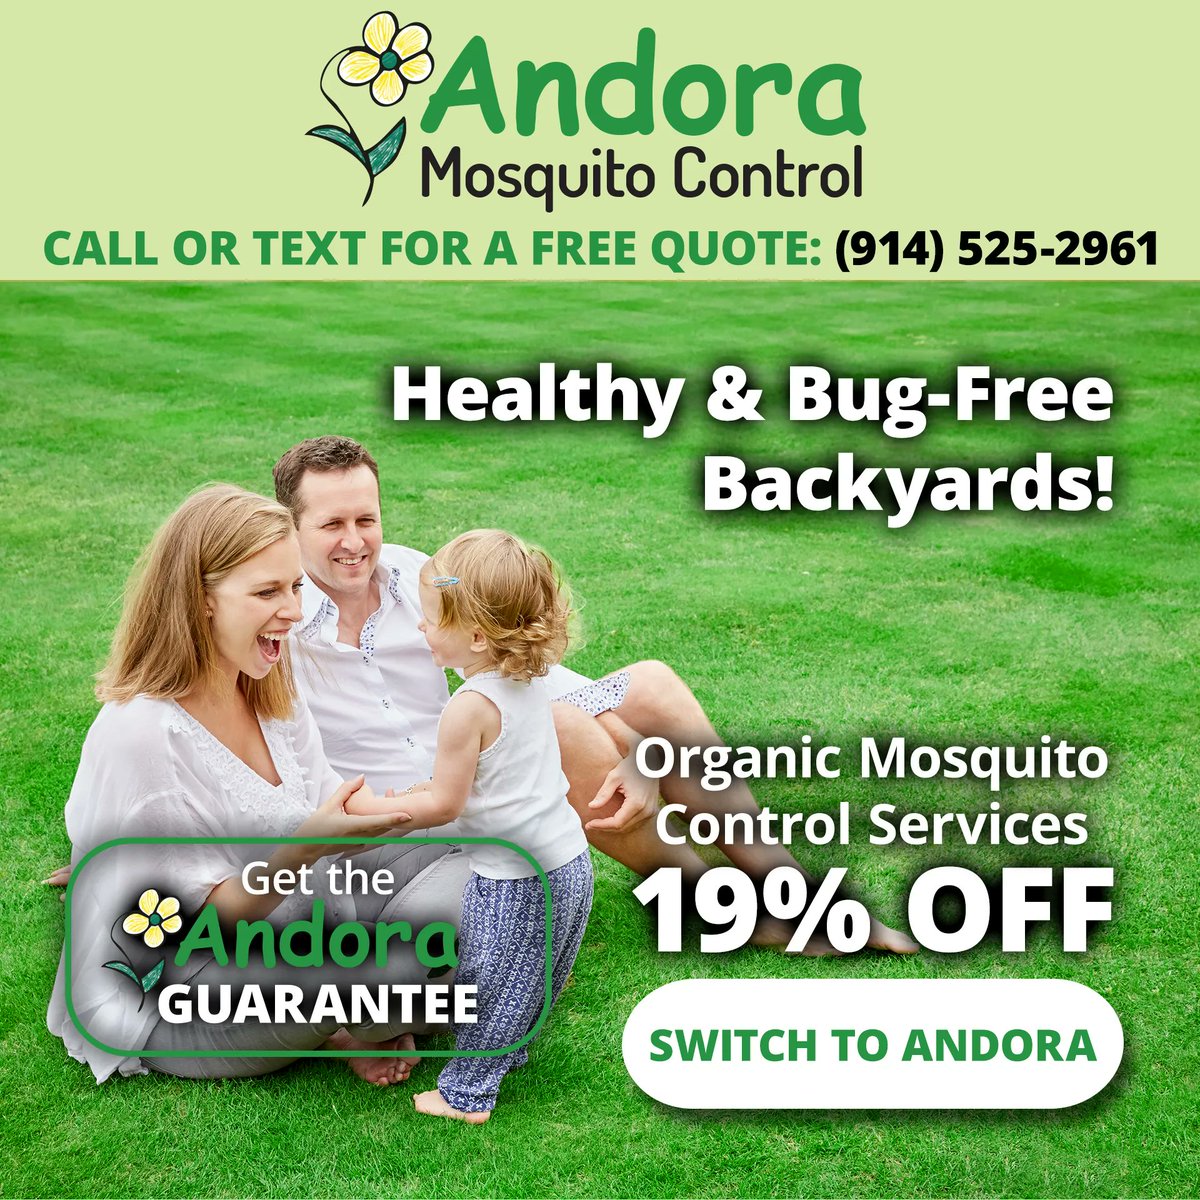 Spring is here and so are the mosquitoes! Keep your lawn healthy and bug-free with our all-natural organic mosquito control. Say goodbye to harsh chemicals and hello to a safe and beautiful lawn. #OrganicMosquitoControl #HealthyLawn